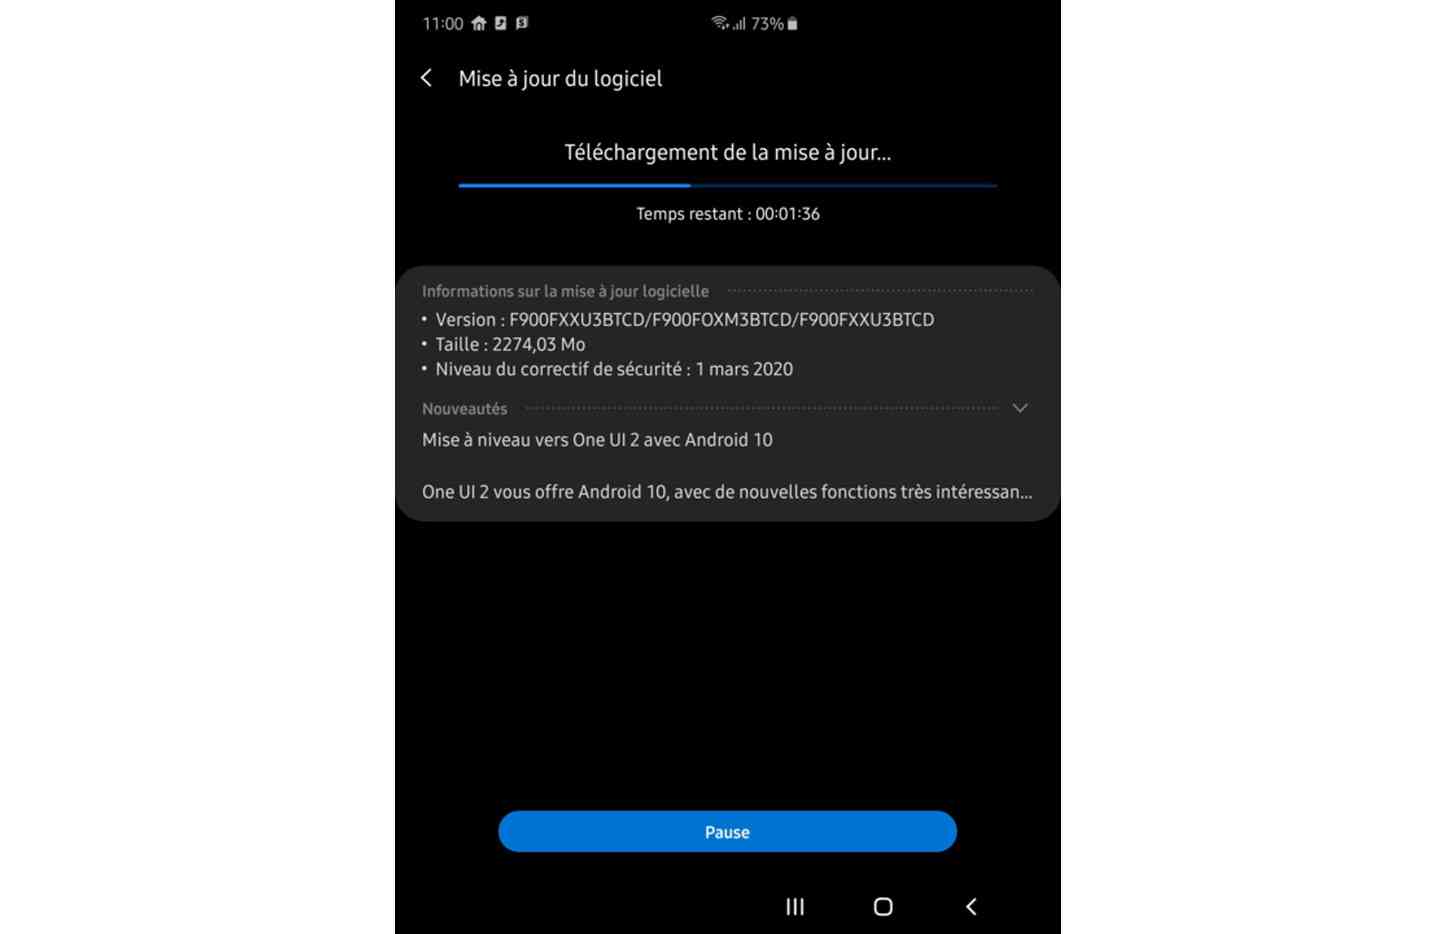 Galaxy Fold Android 10 update